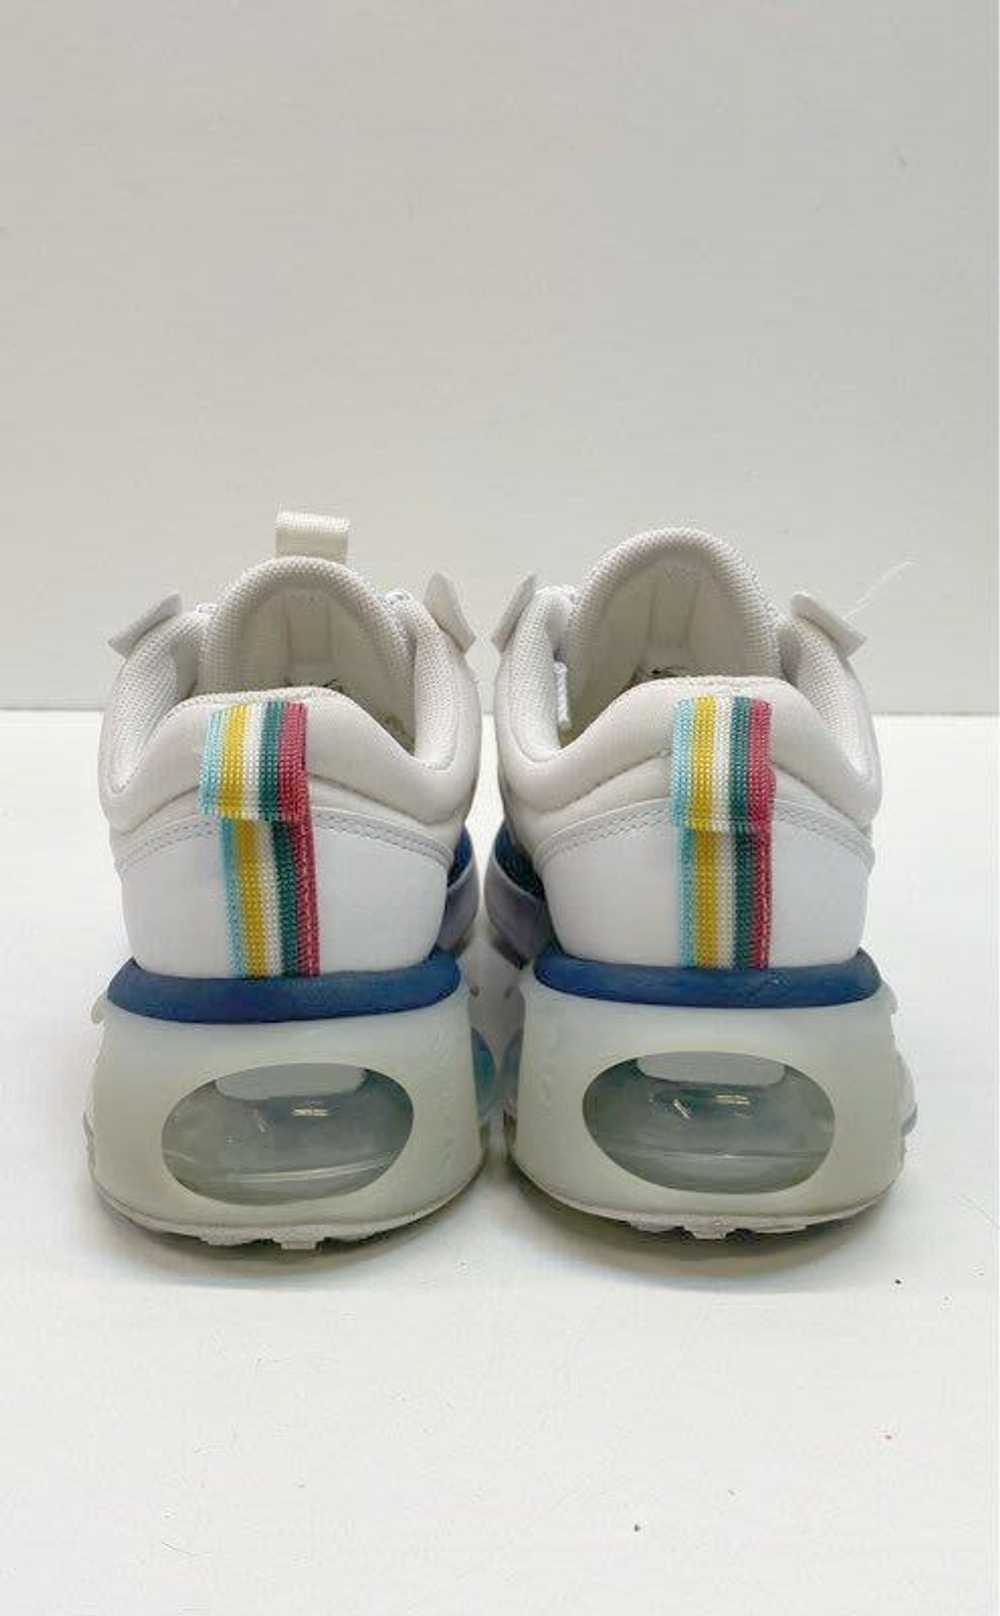 Nike Air Max Sneakers White Gypsy Rose 6.5 - image 4